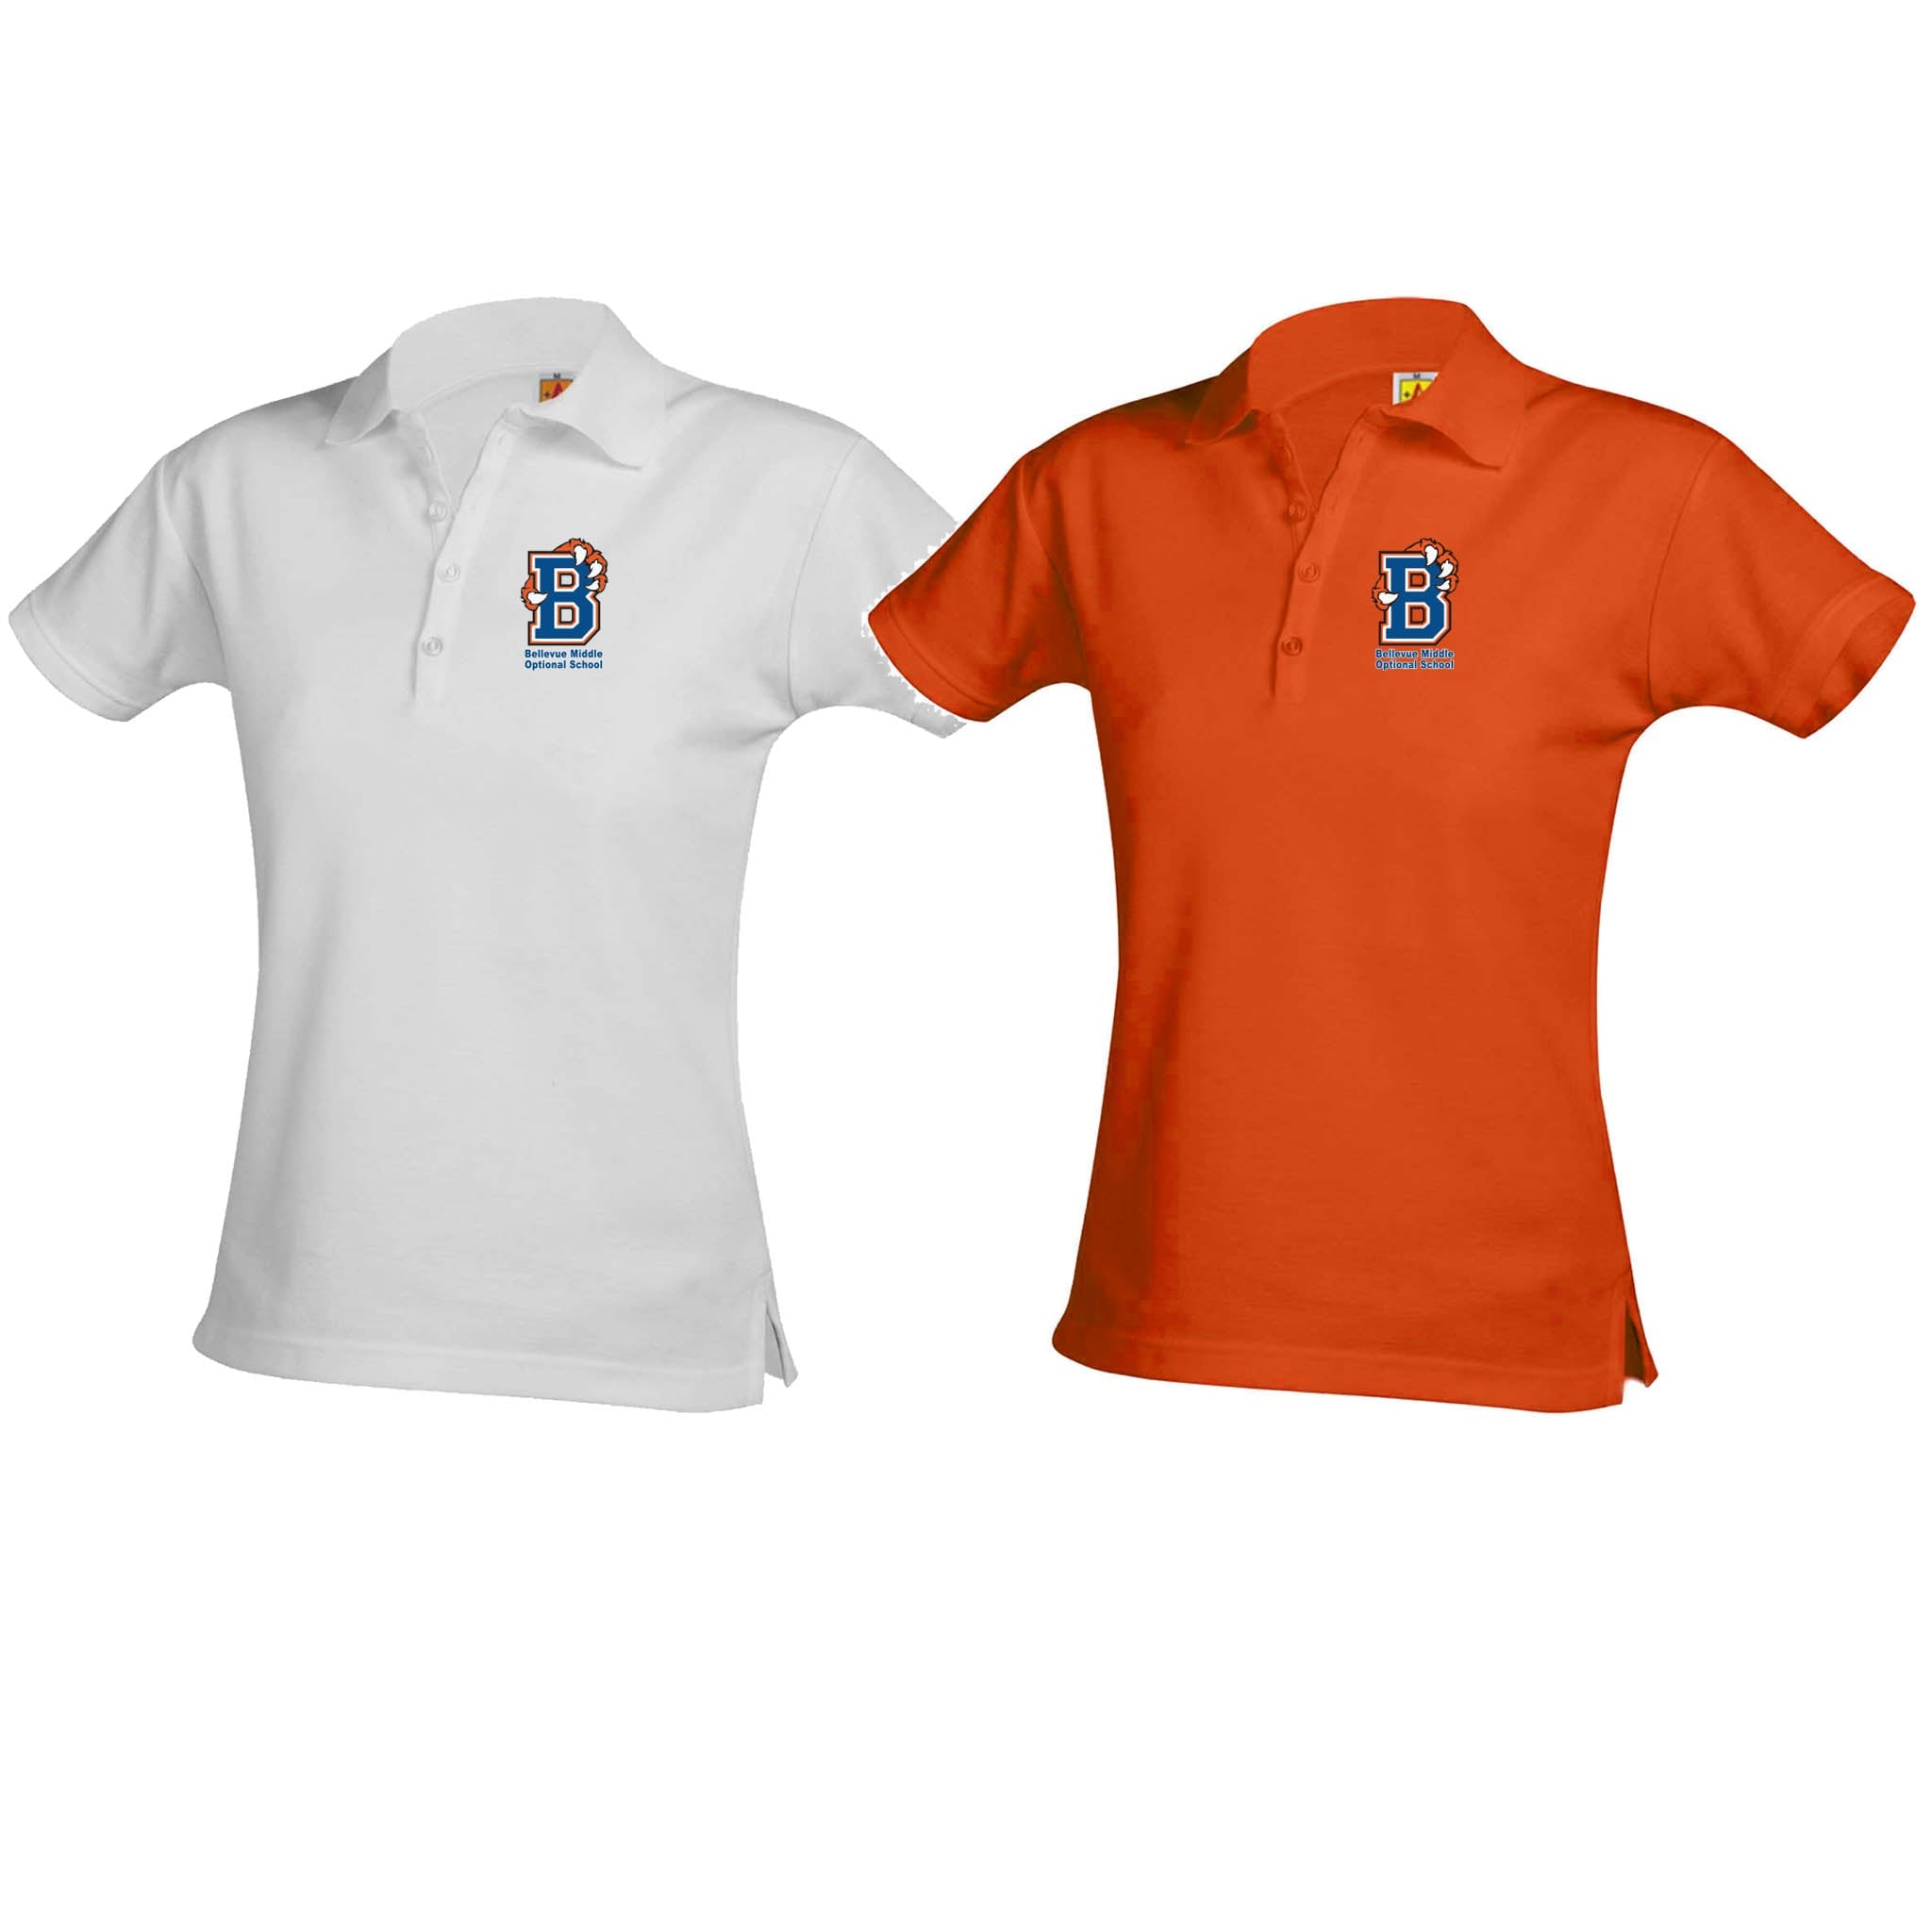 Bellevue 7th-8th Girls Printed Polos